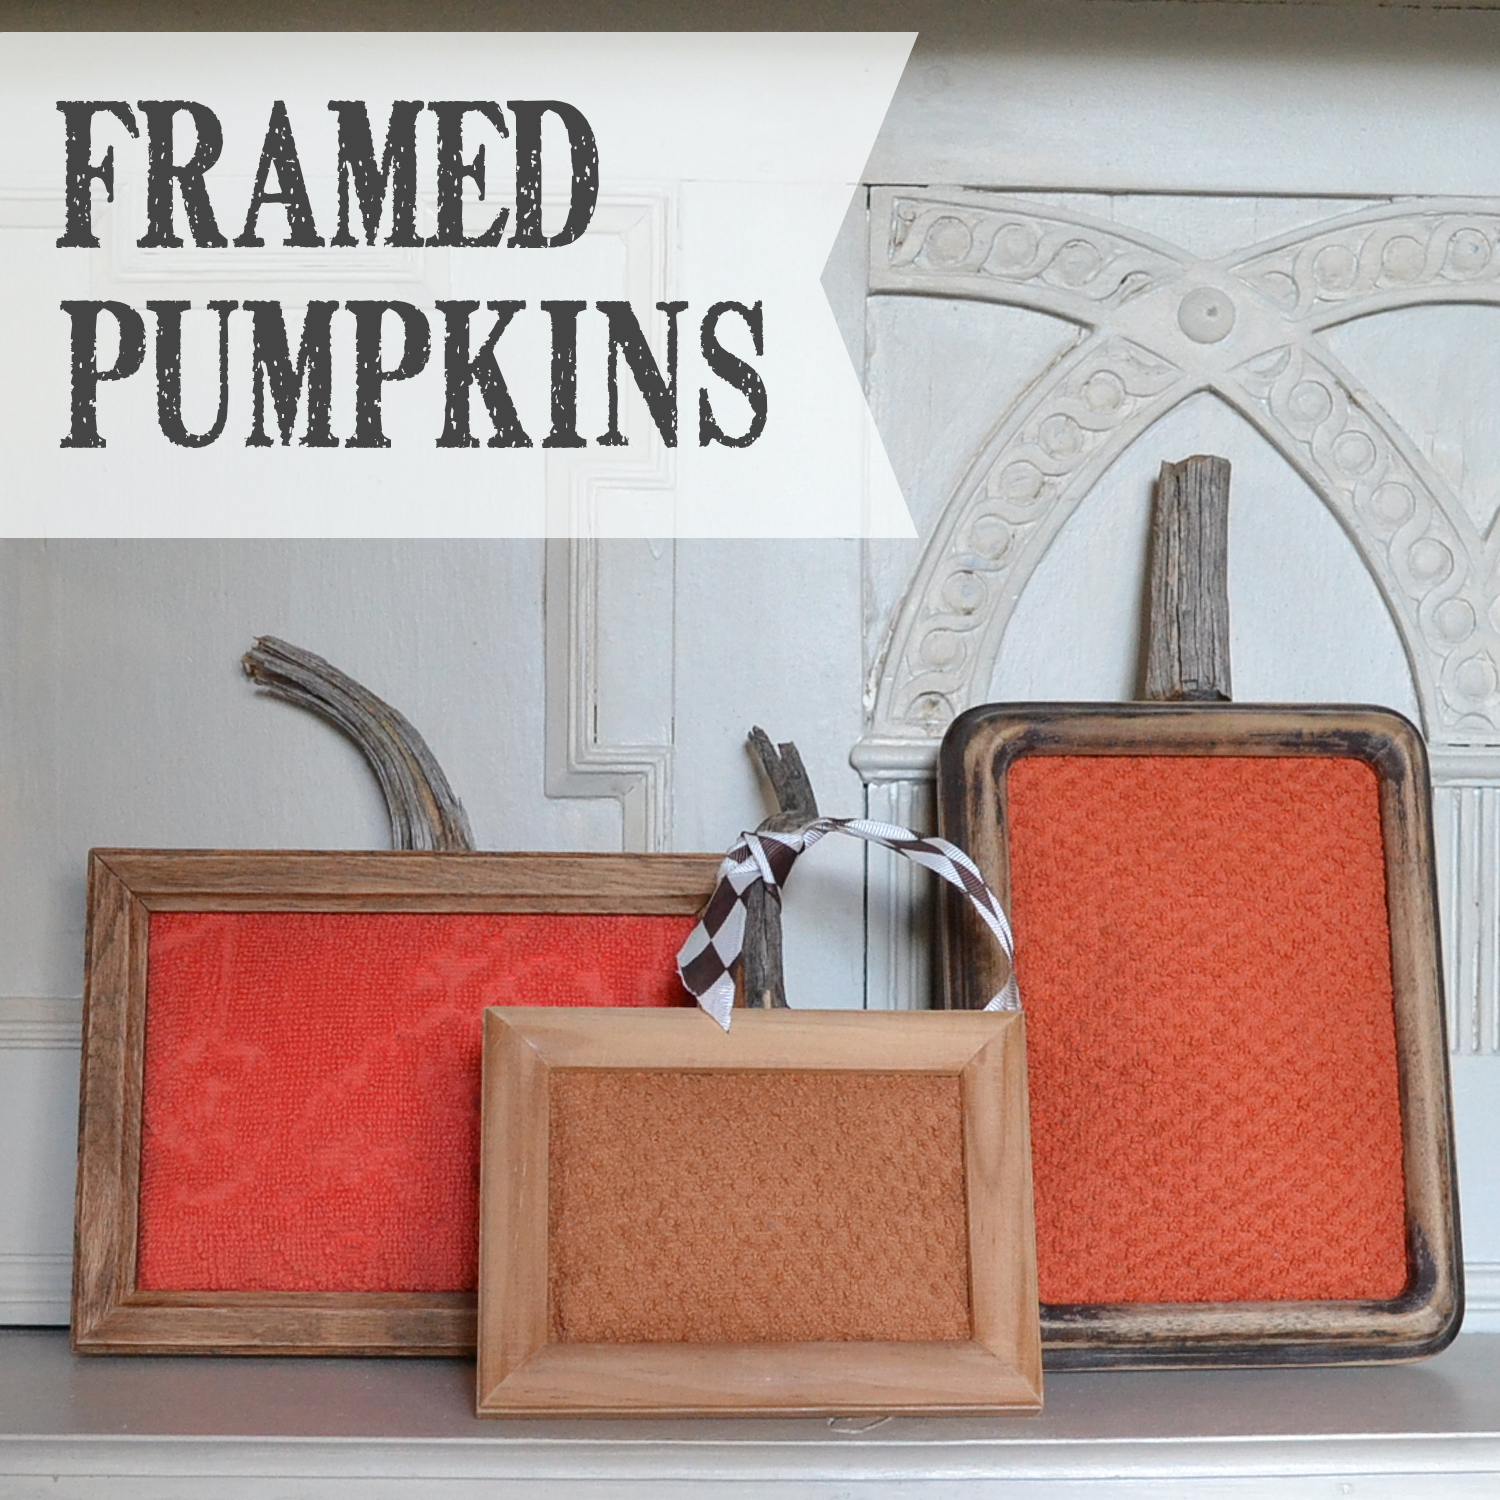 framed-pumpkins-large-text-country-design-style